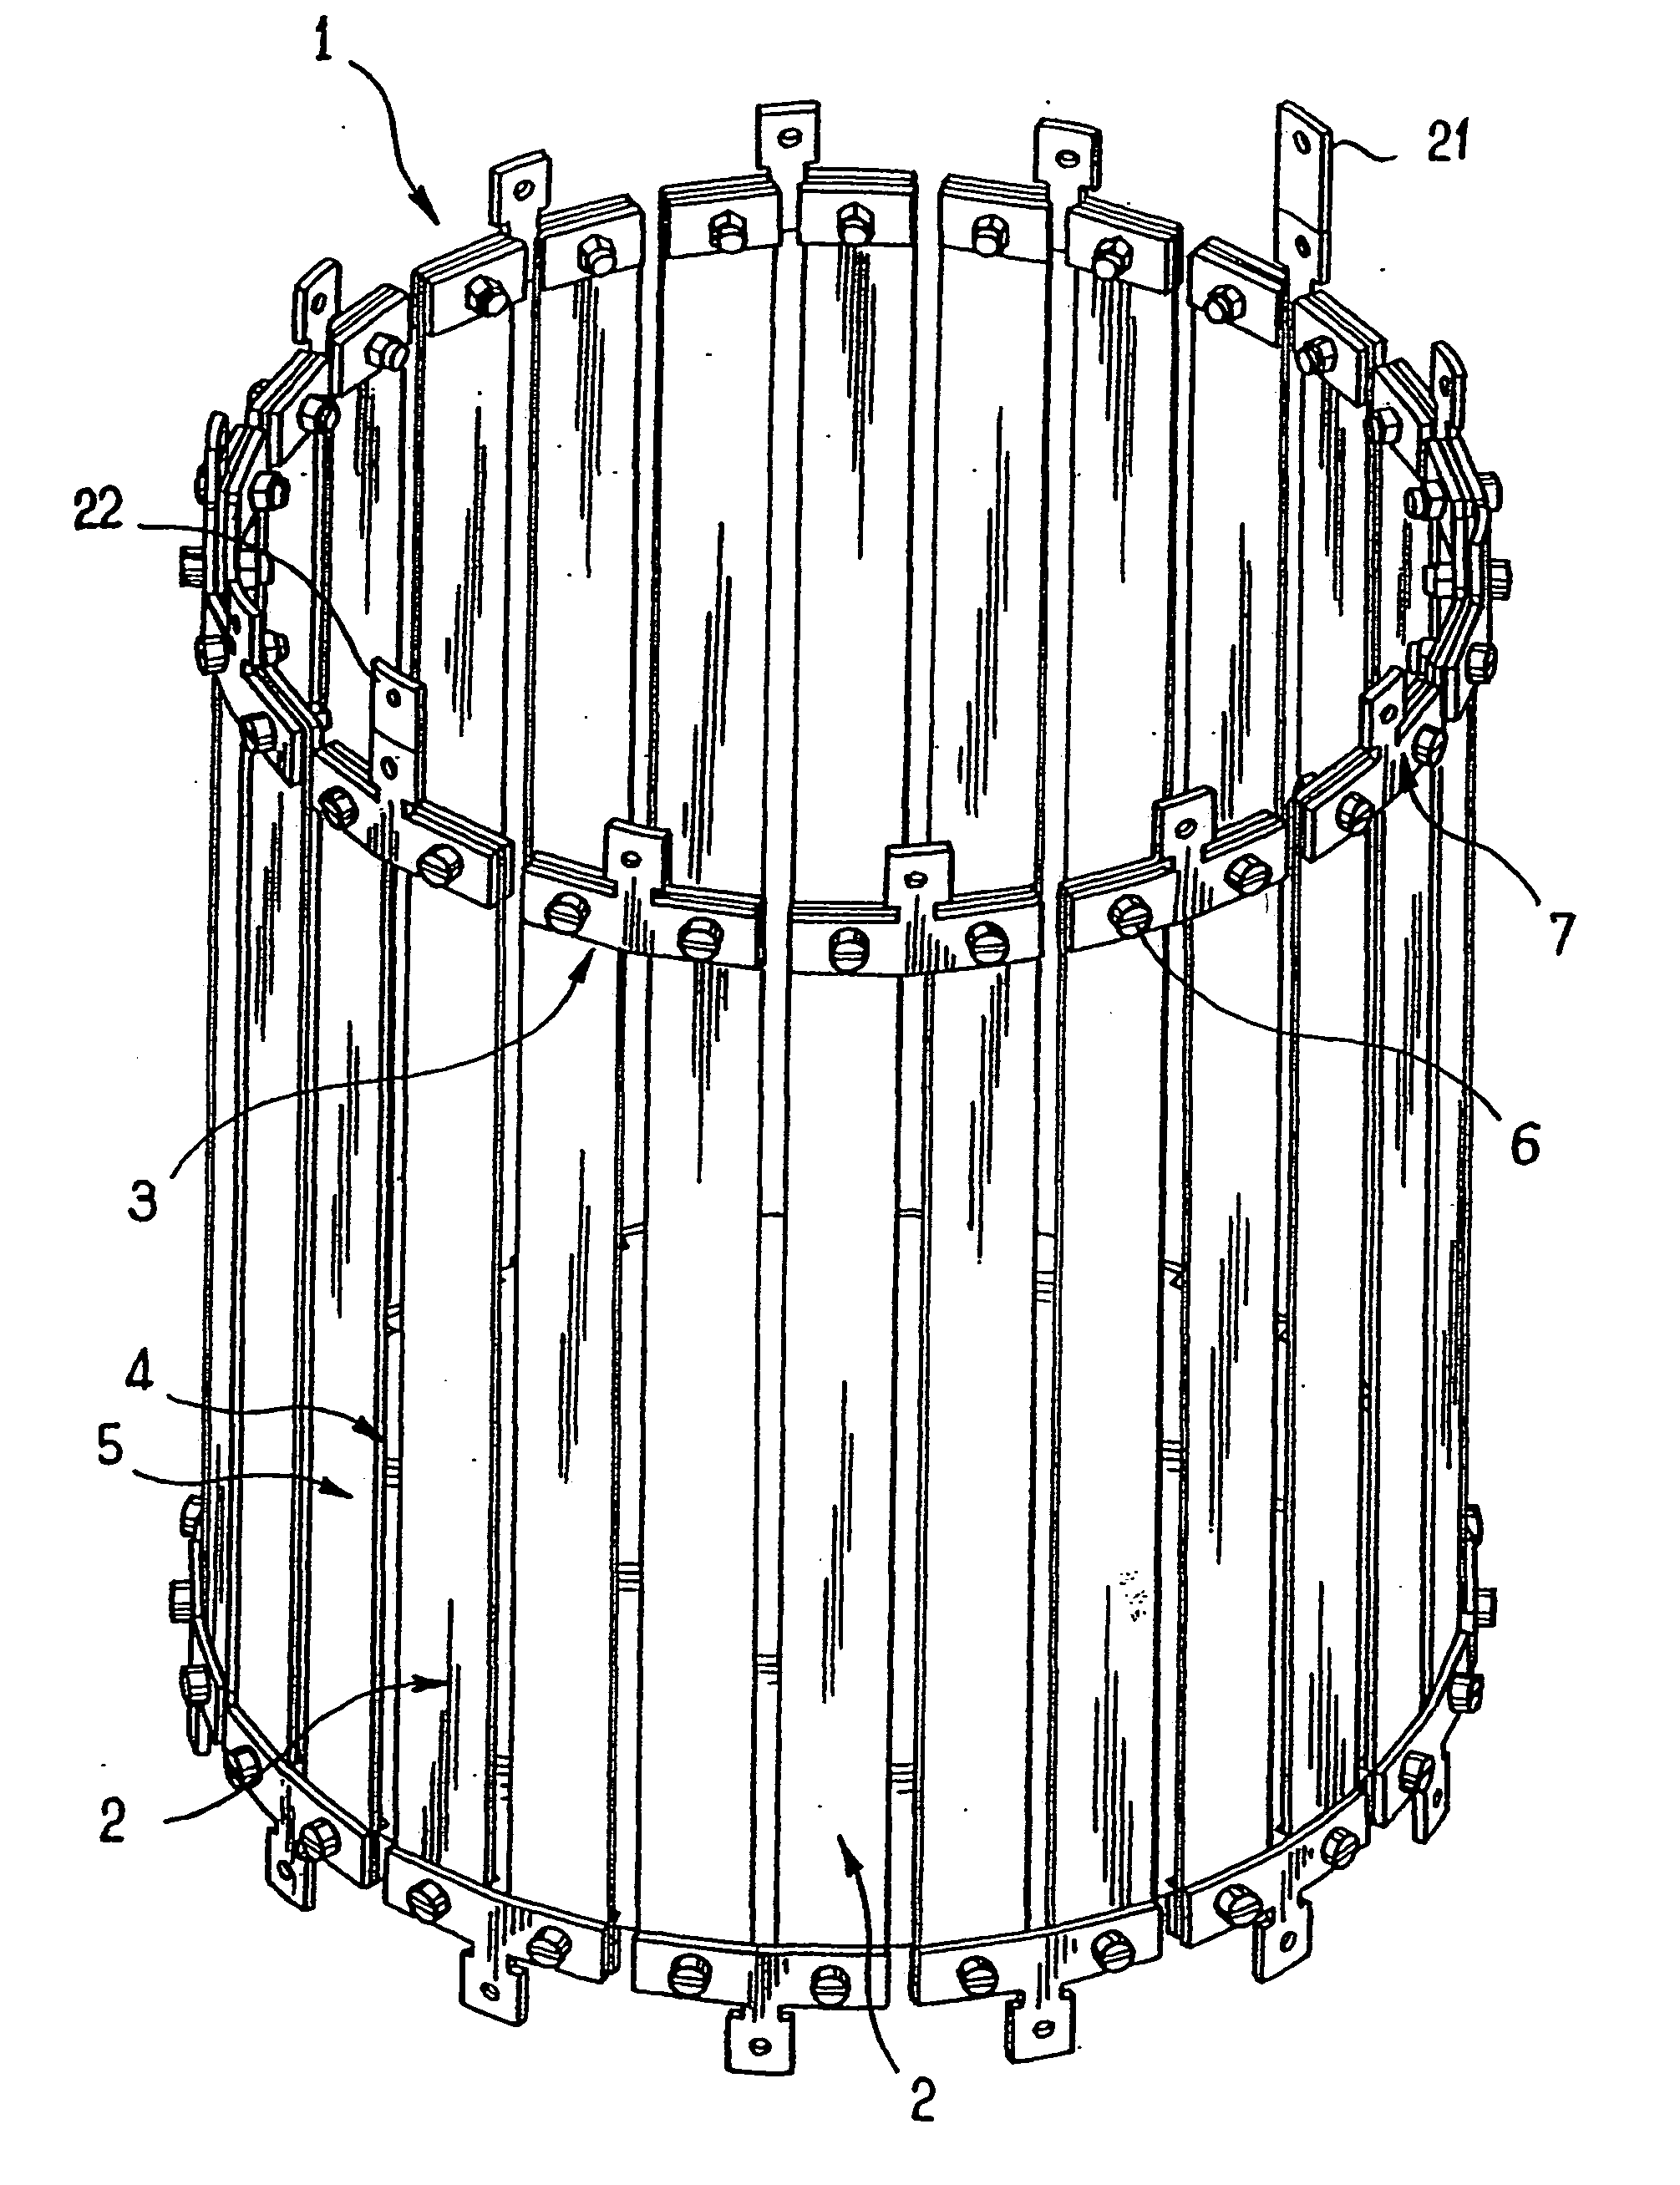 Made to the structure of a graphite resistance furnace